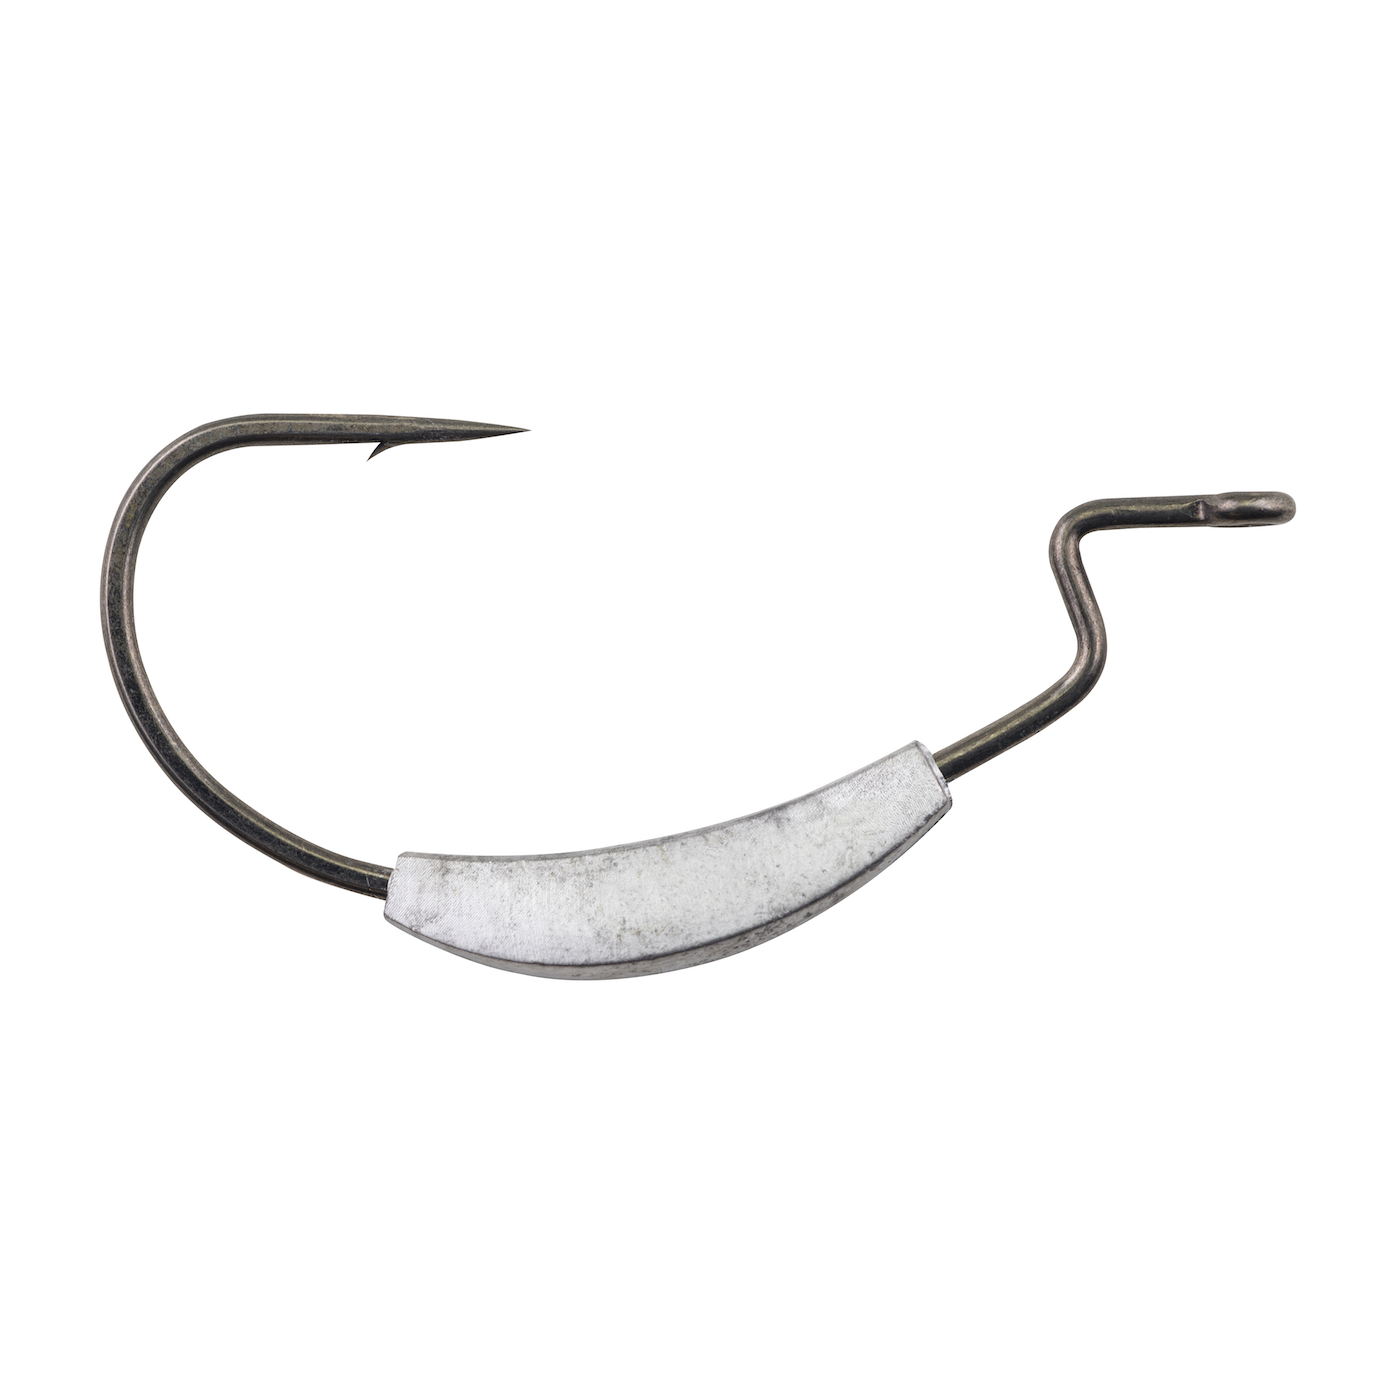 The Weighted EWG hooks can be rigged with craws, creatures and worms. The weighted hook shank allows for longer casts and an attractive action beneath the surface near the targeted cover. Sizes 3/0 through 7/0 are available in packages of five for $5.99.